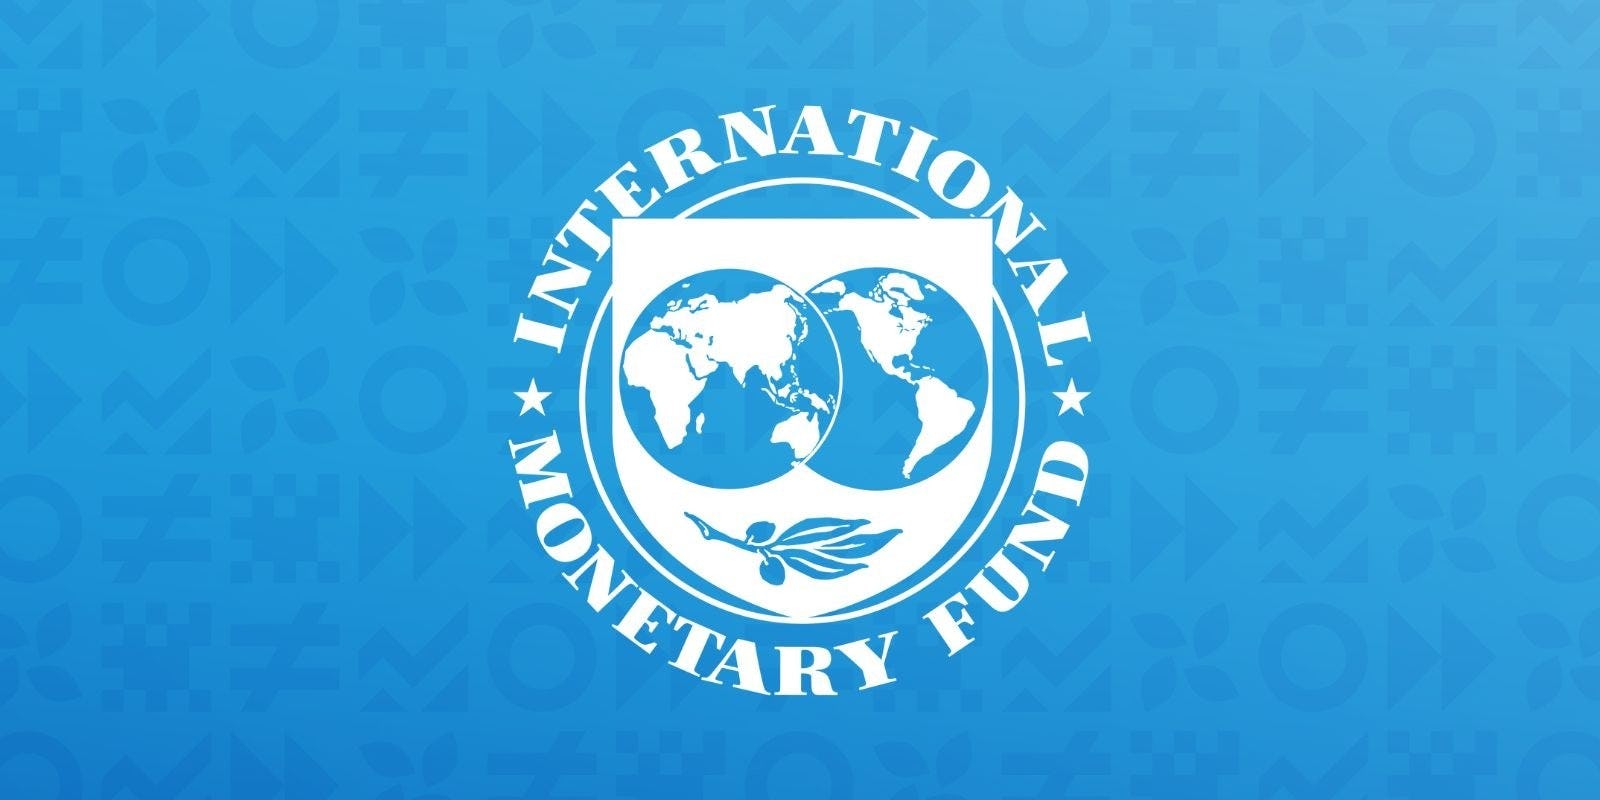 Sri Lanka must present debt restructuring strategy by end of April - IMF